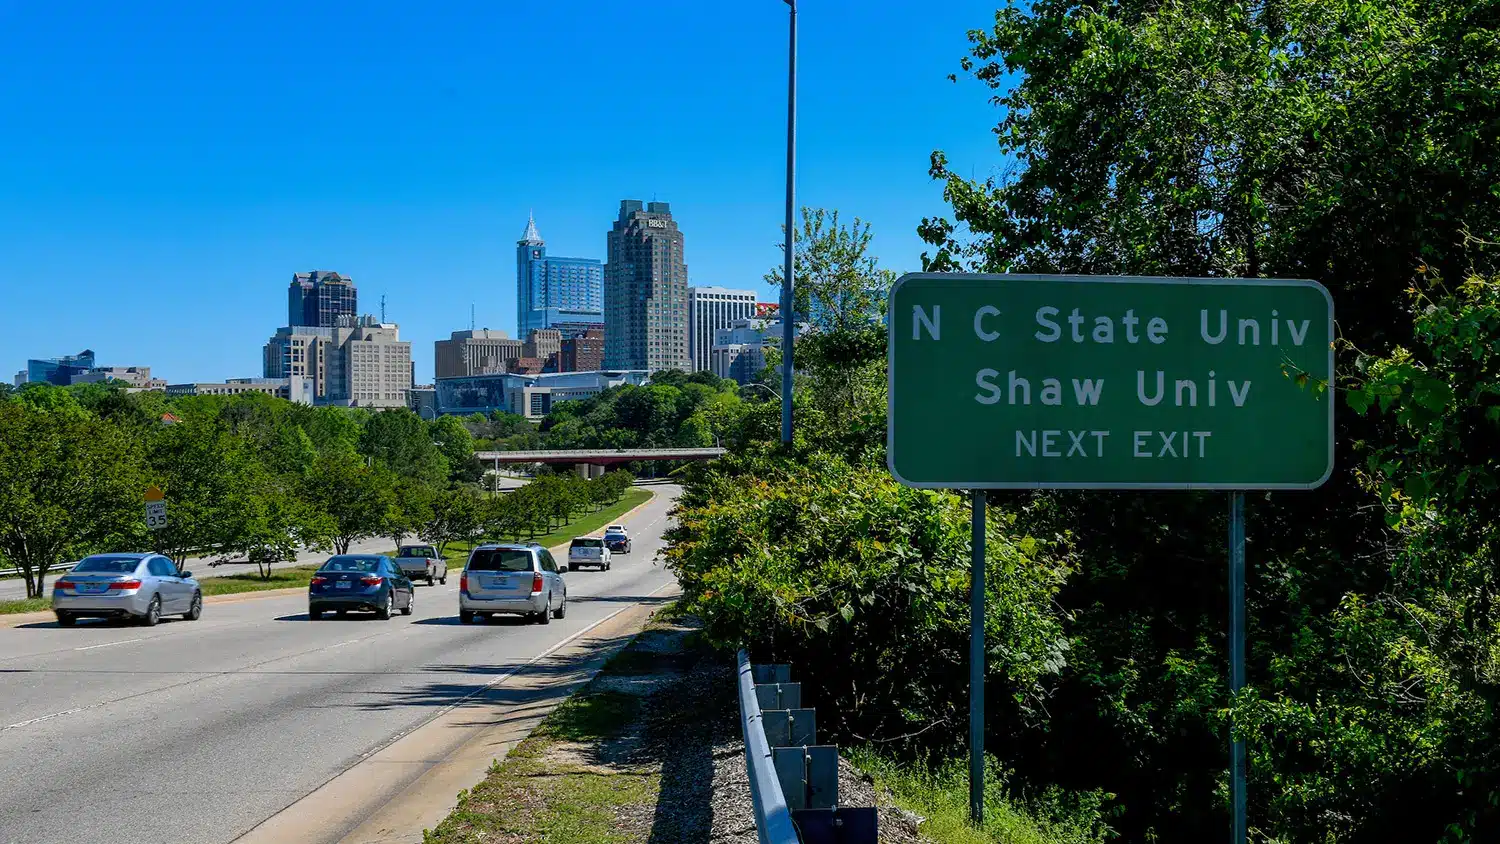 With the Raleigh skyline close by, an exit sign signals that NC State University is a short drive away.